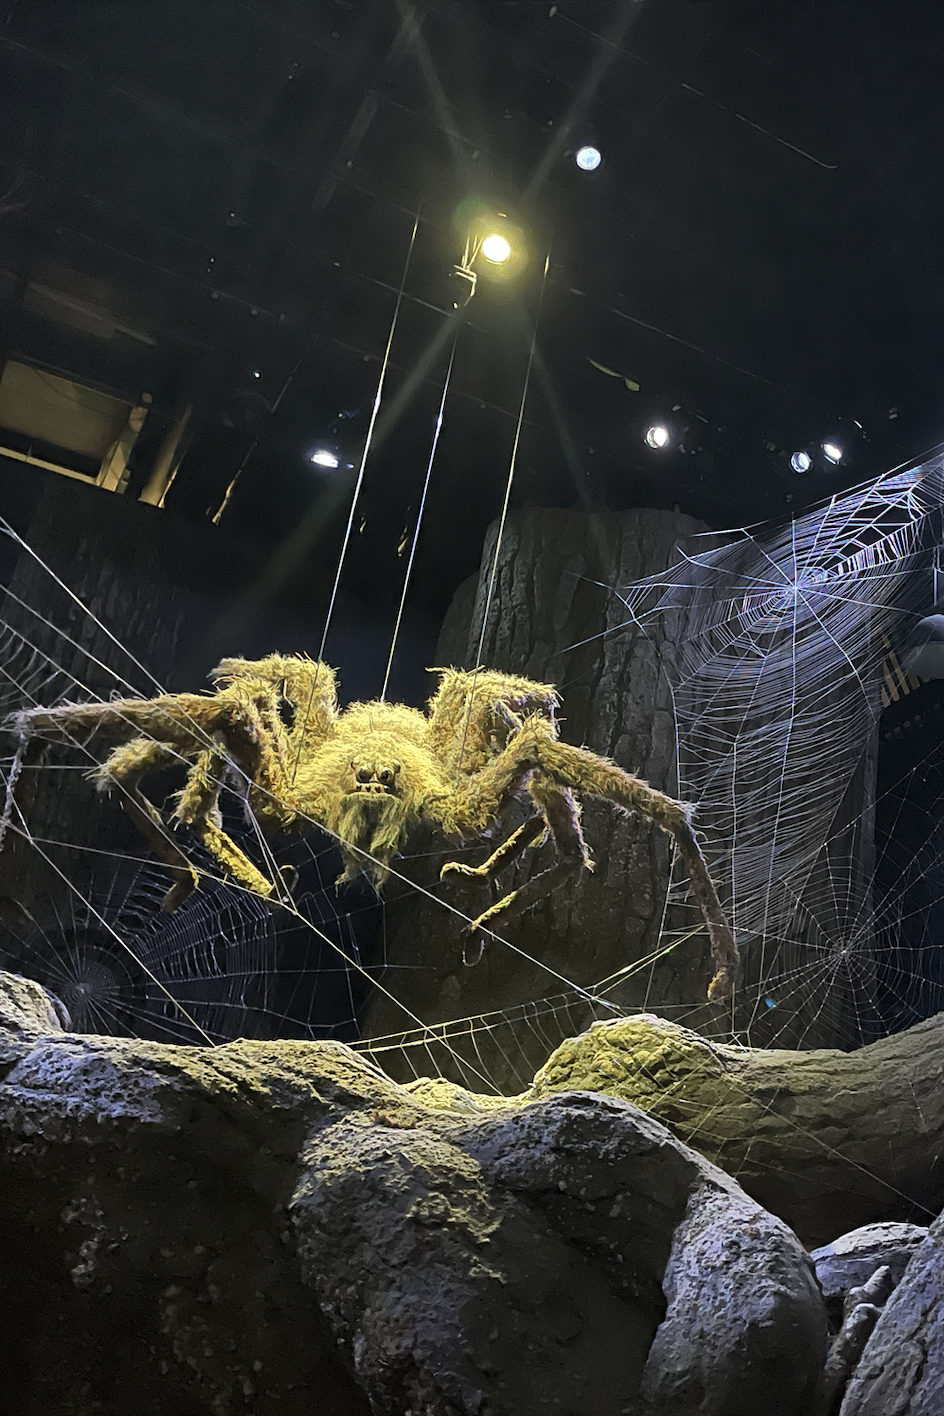 Giant spider model on rocky display with webbing, under dim lighting in a themed exhibit setting